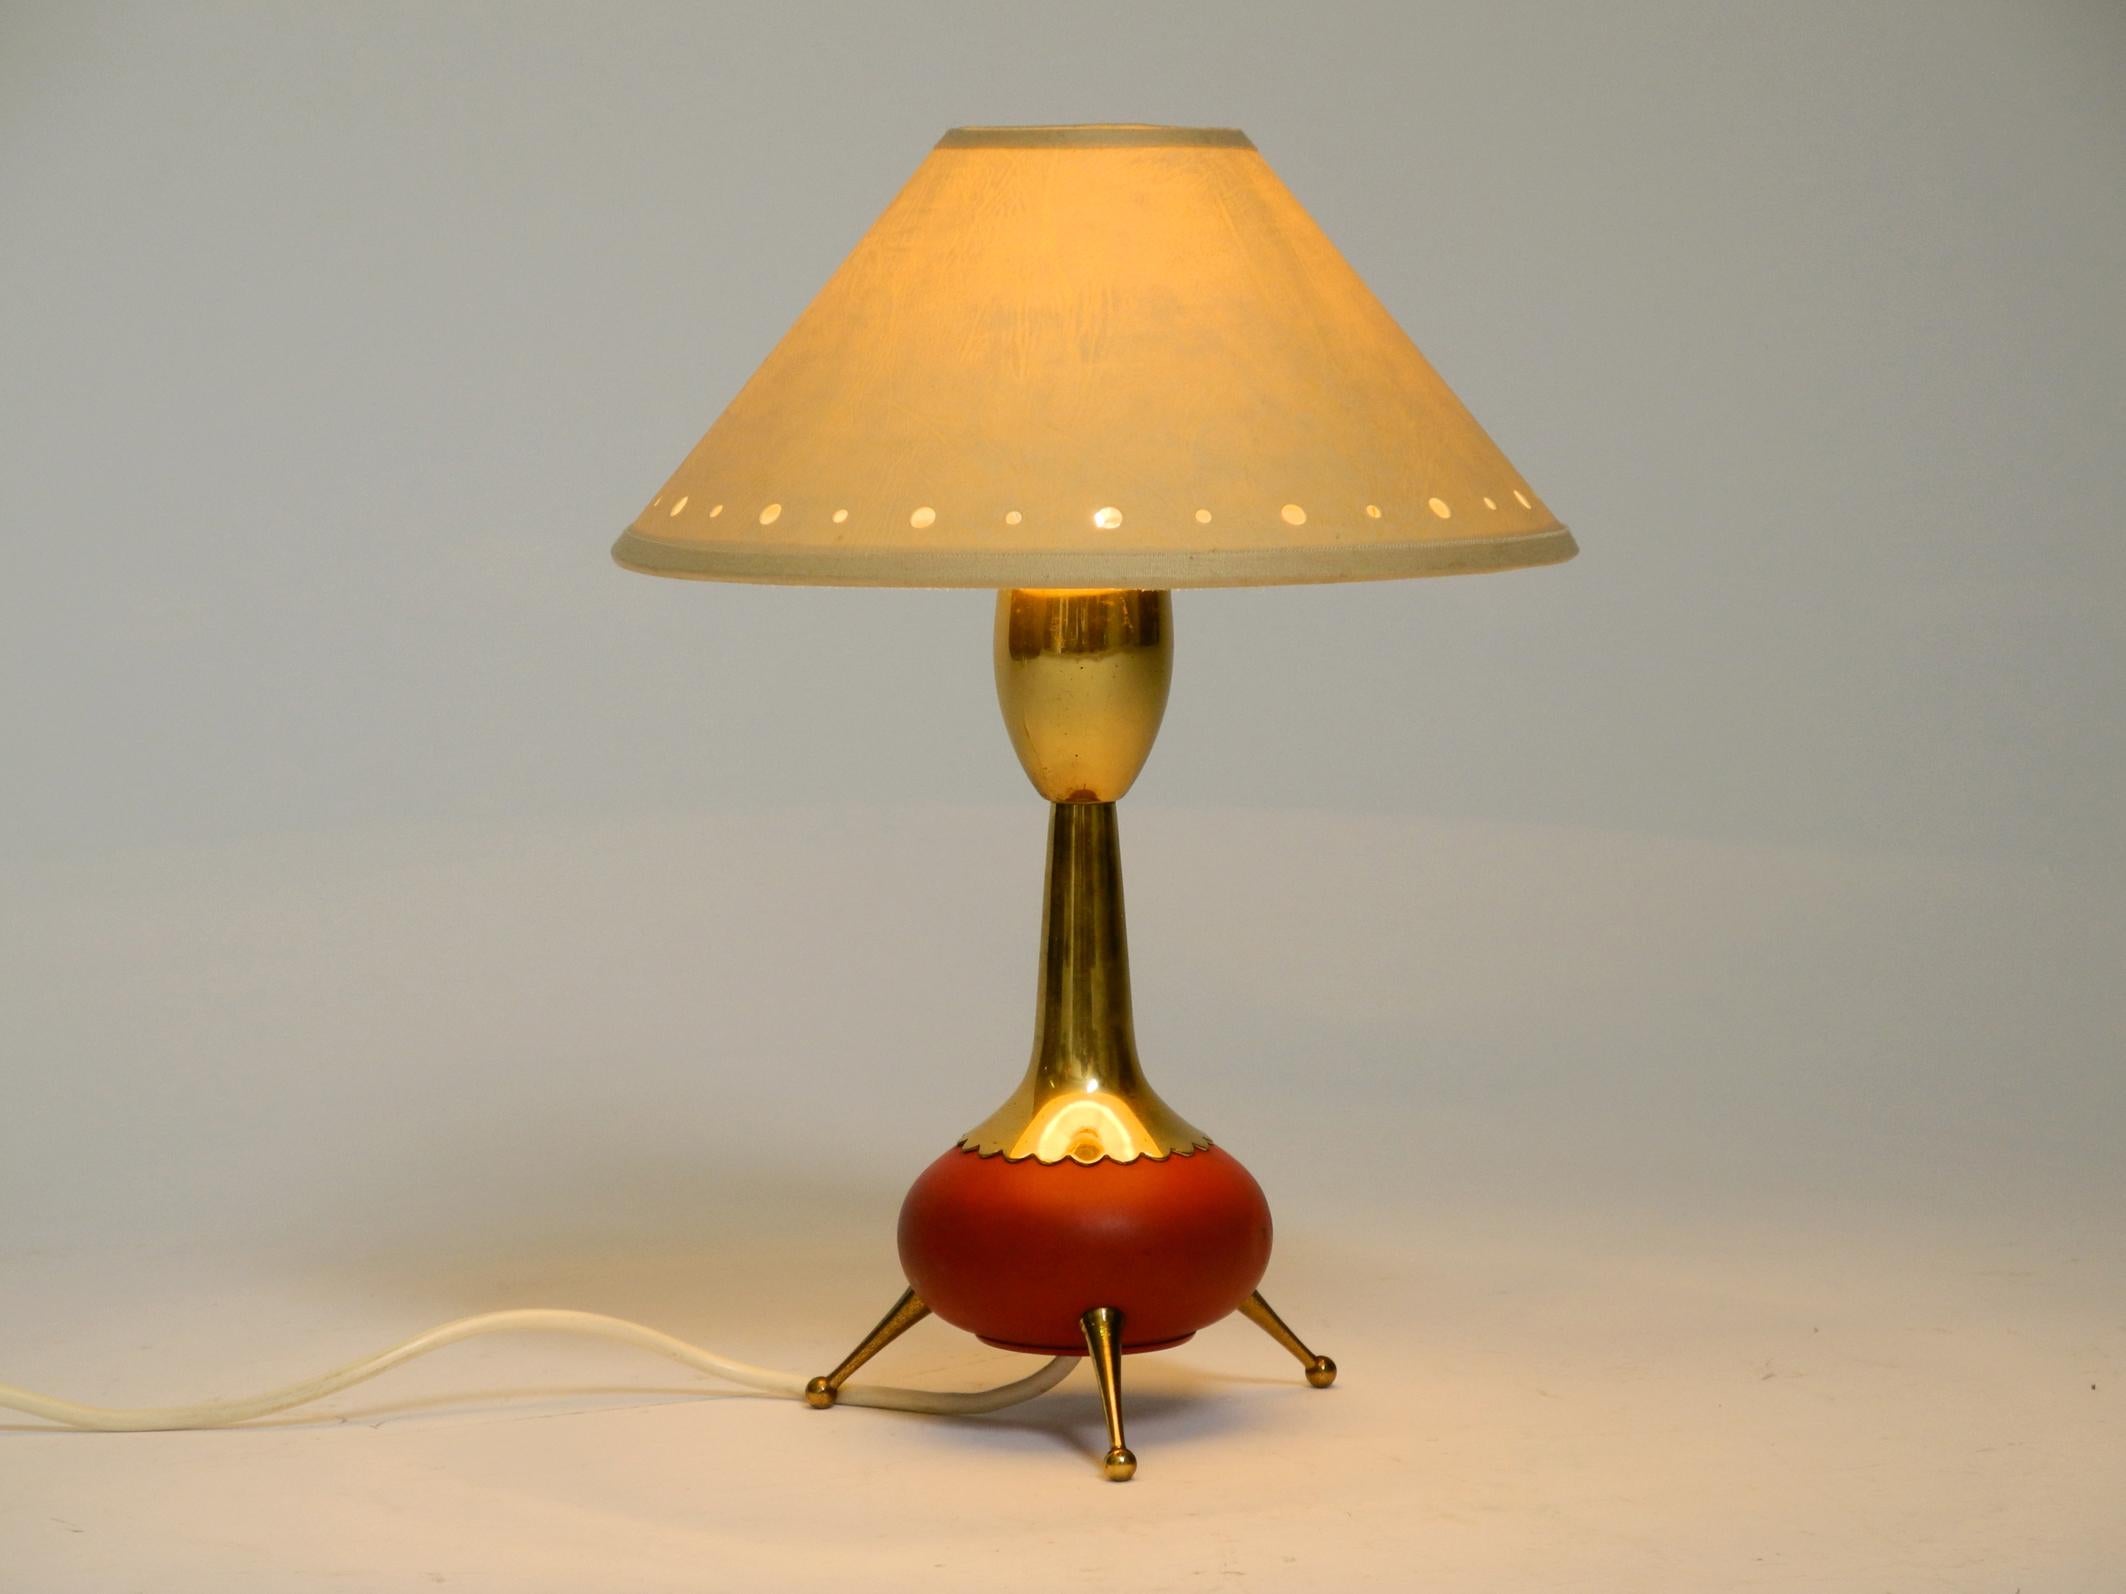 Beautiful rare original Mid Century Modern brass tripod table lamp with fabric lampshade.
Typical 1950s high quality design made of brass and red painted metal.
Very good vintage condition and fully functional.
No damage, only slight signs of